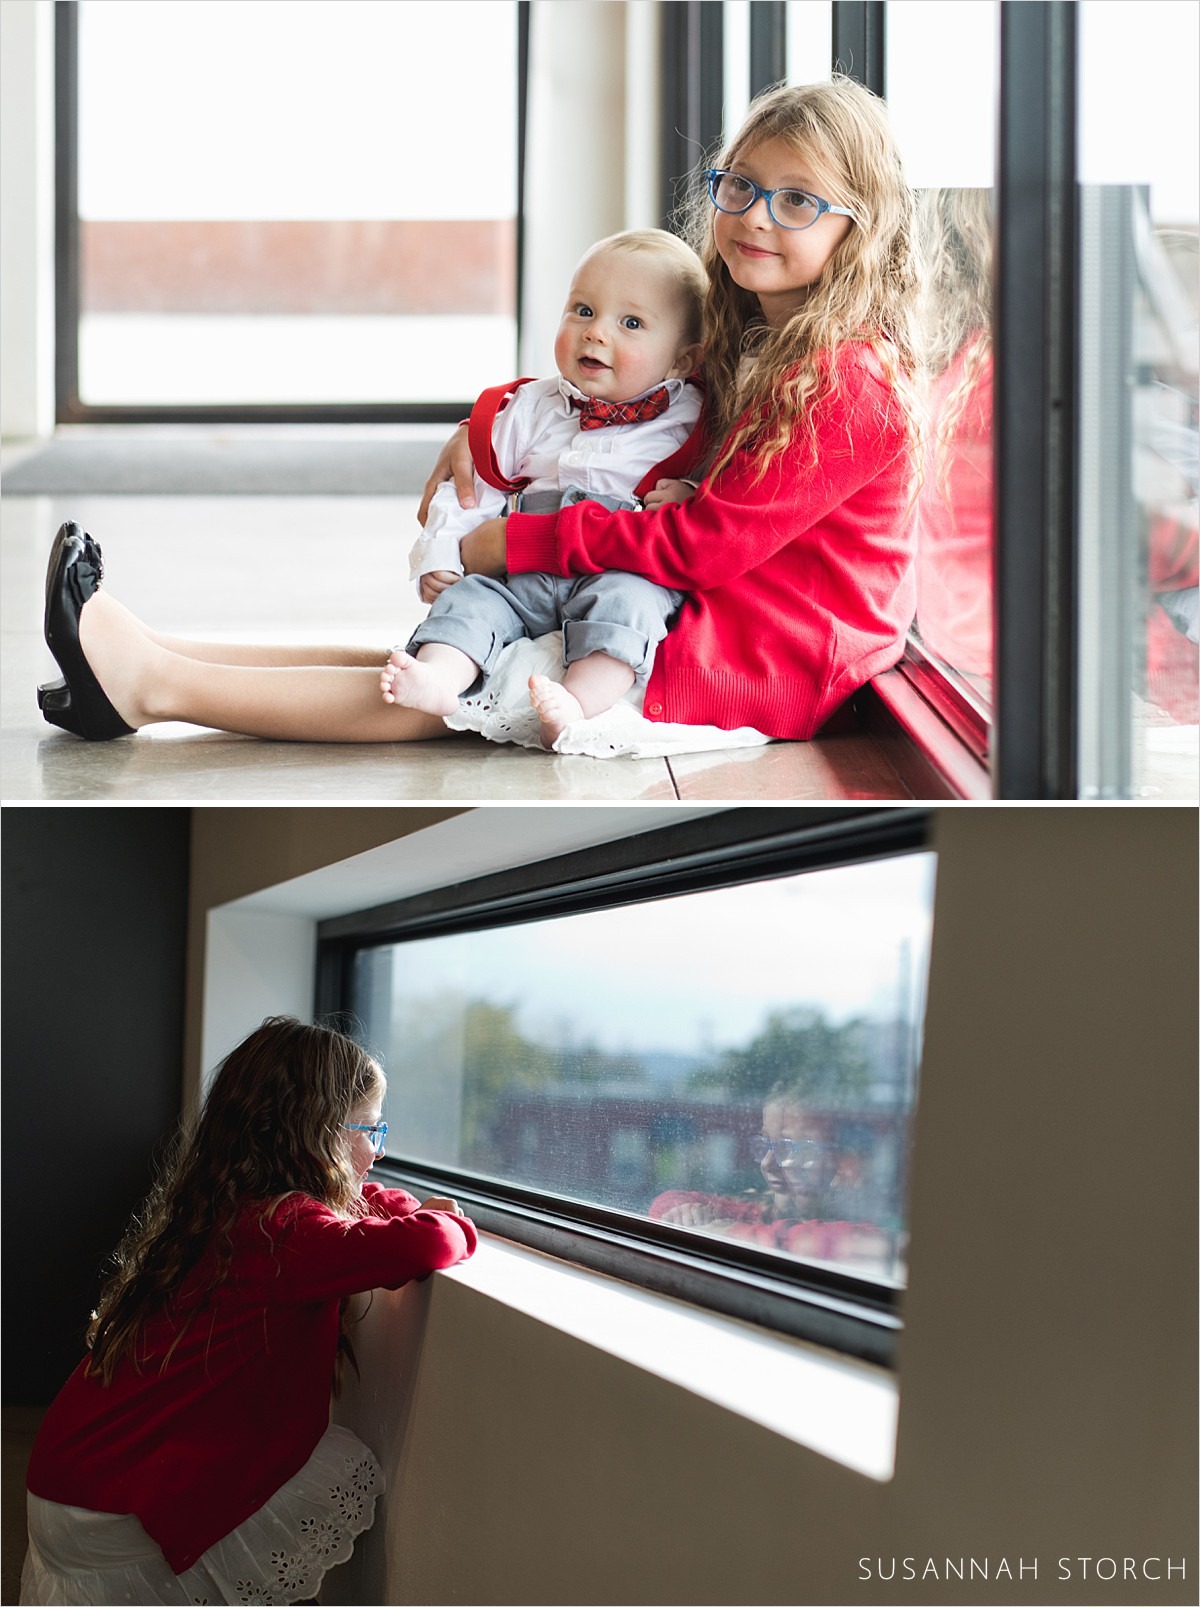 two images of a sister near big windows